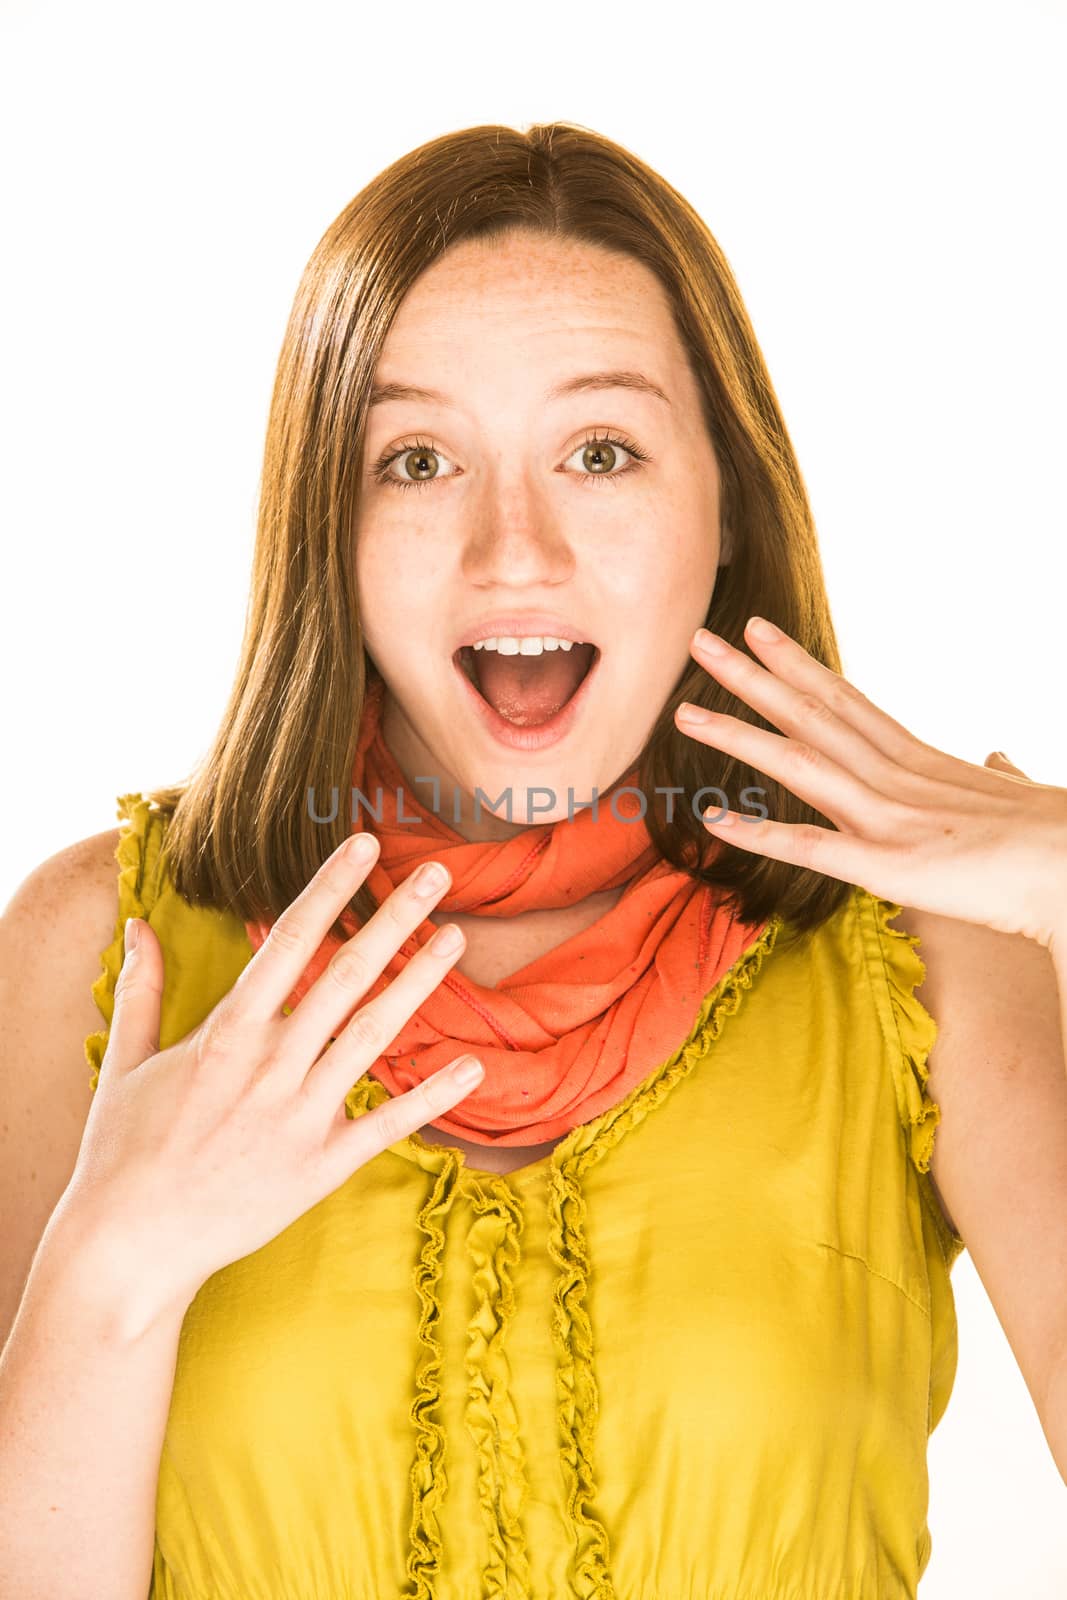 Pretty girl with a surprised expression on white background